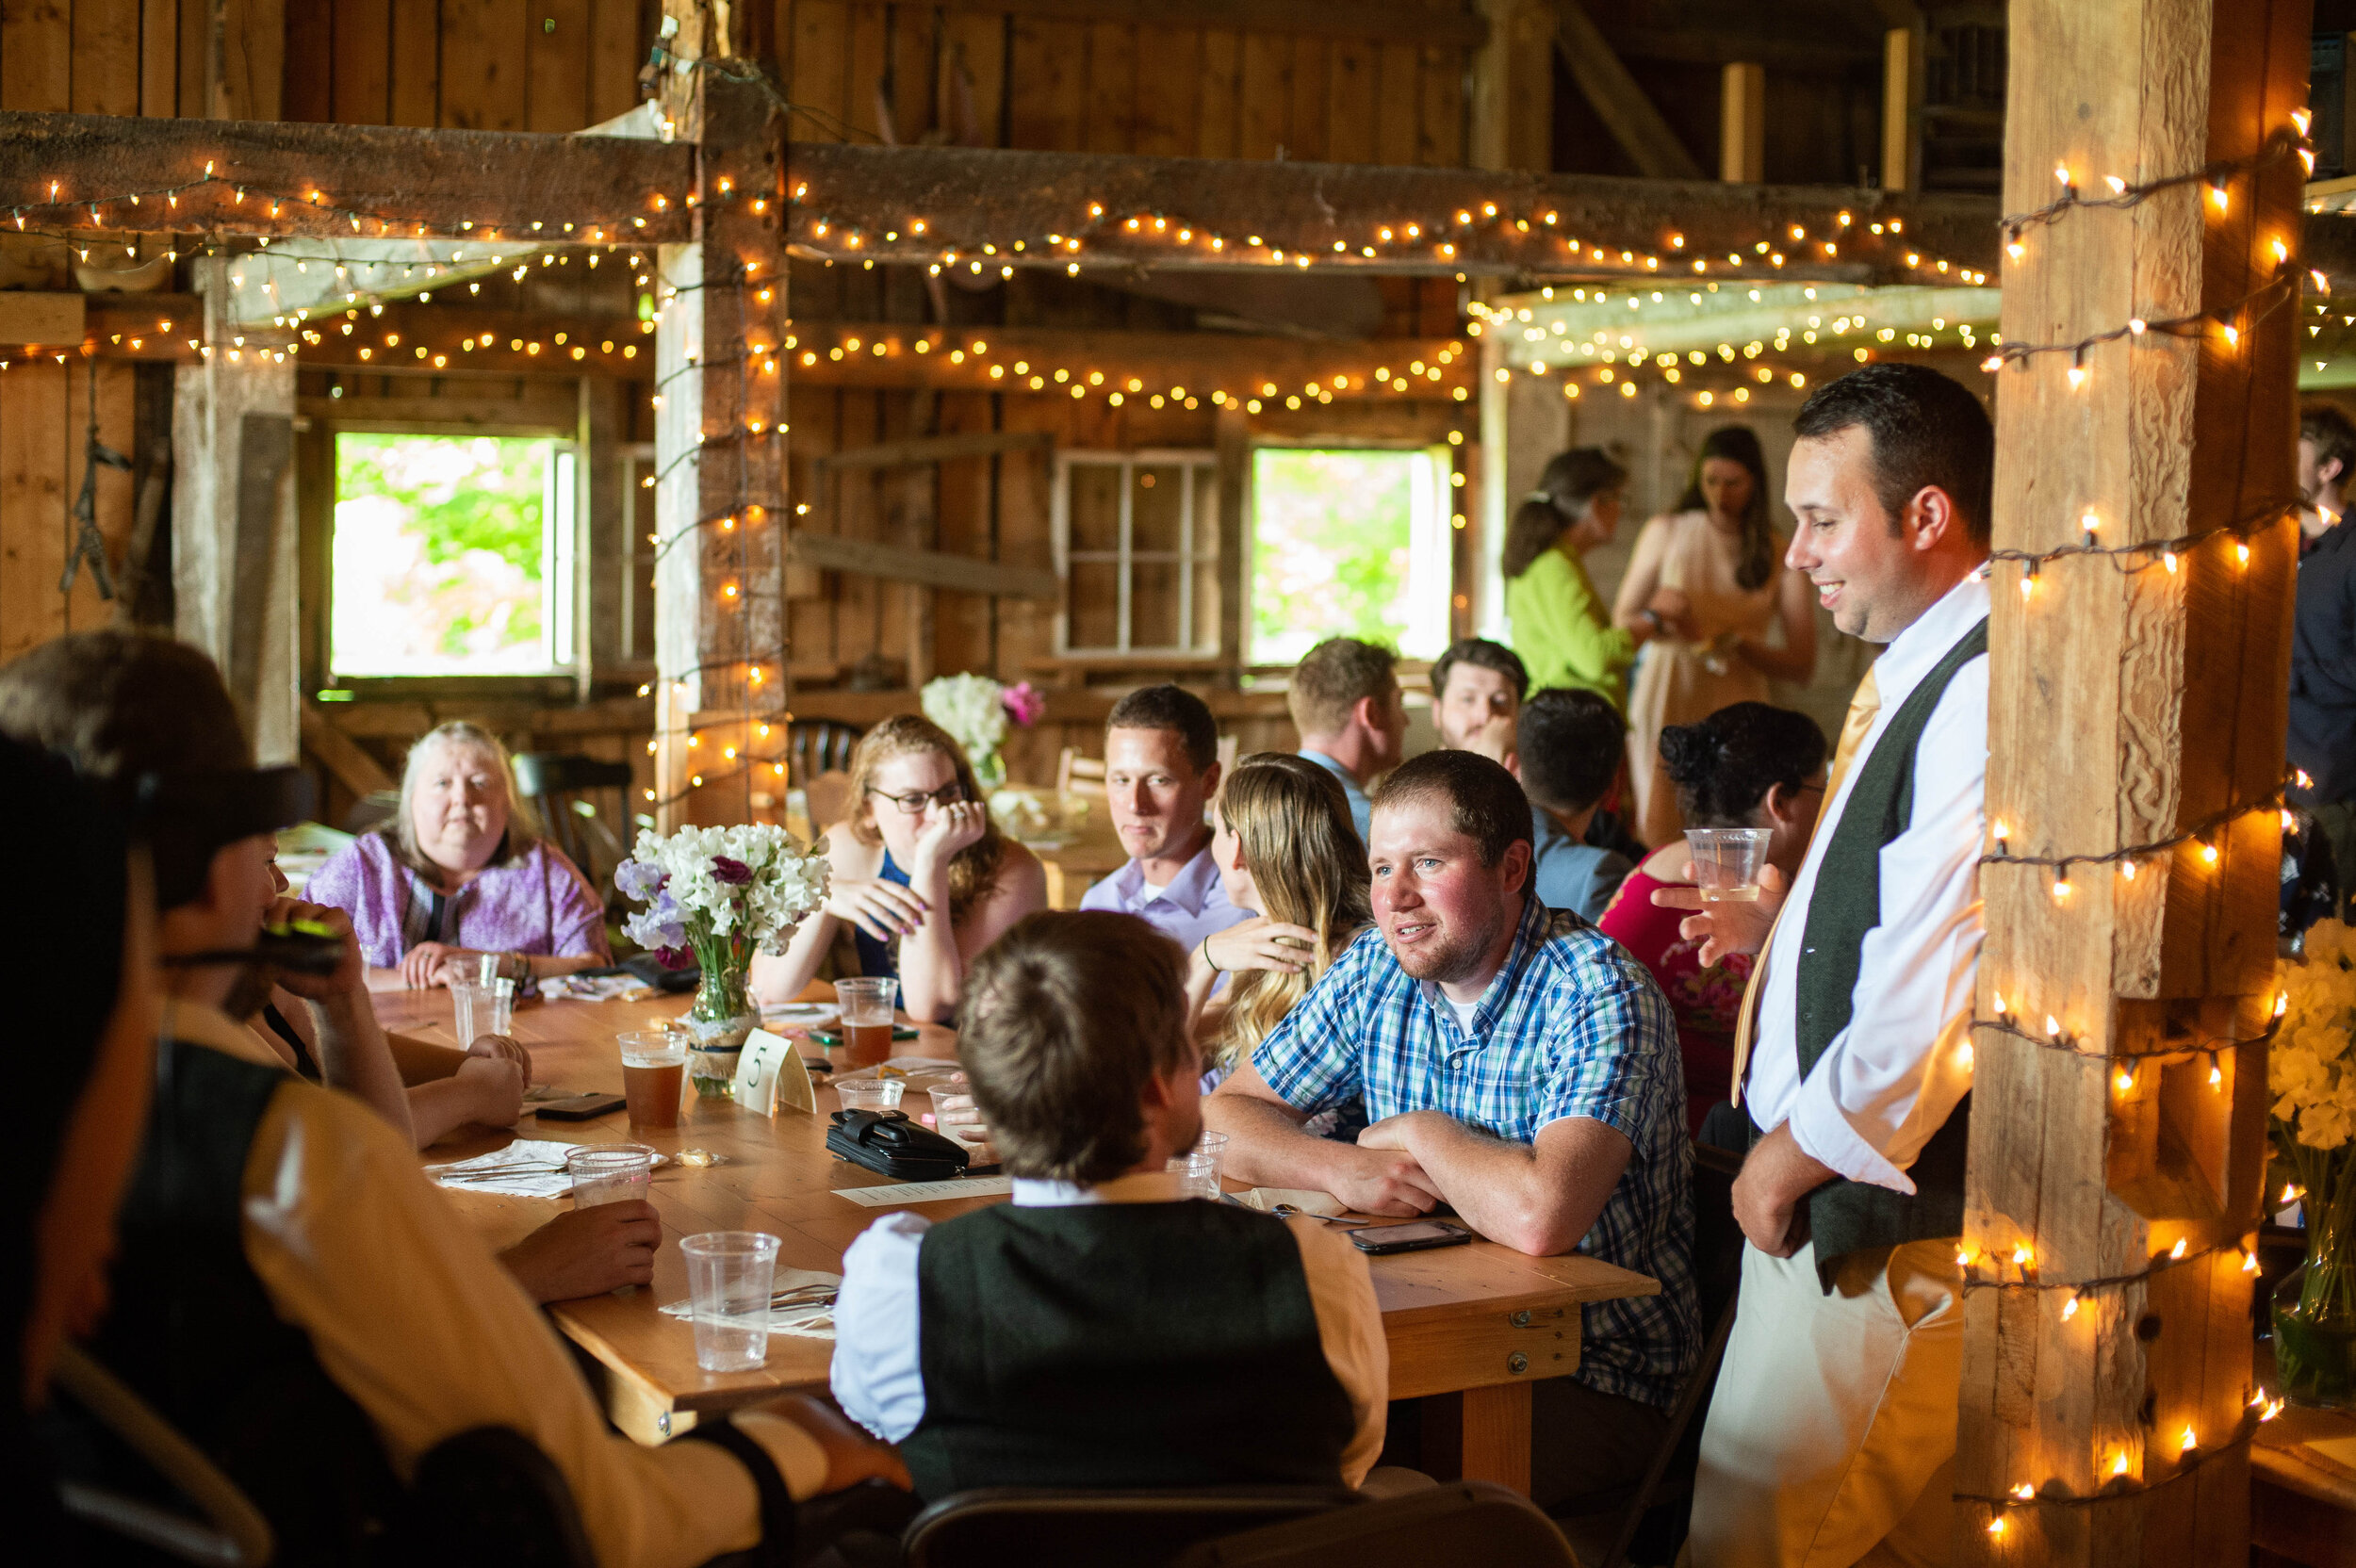 A gathering of people seated in a barn lit with twinkle lights in daylight